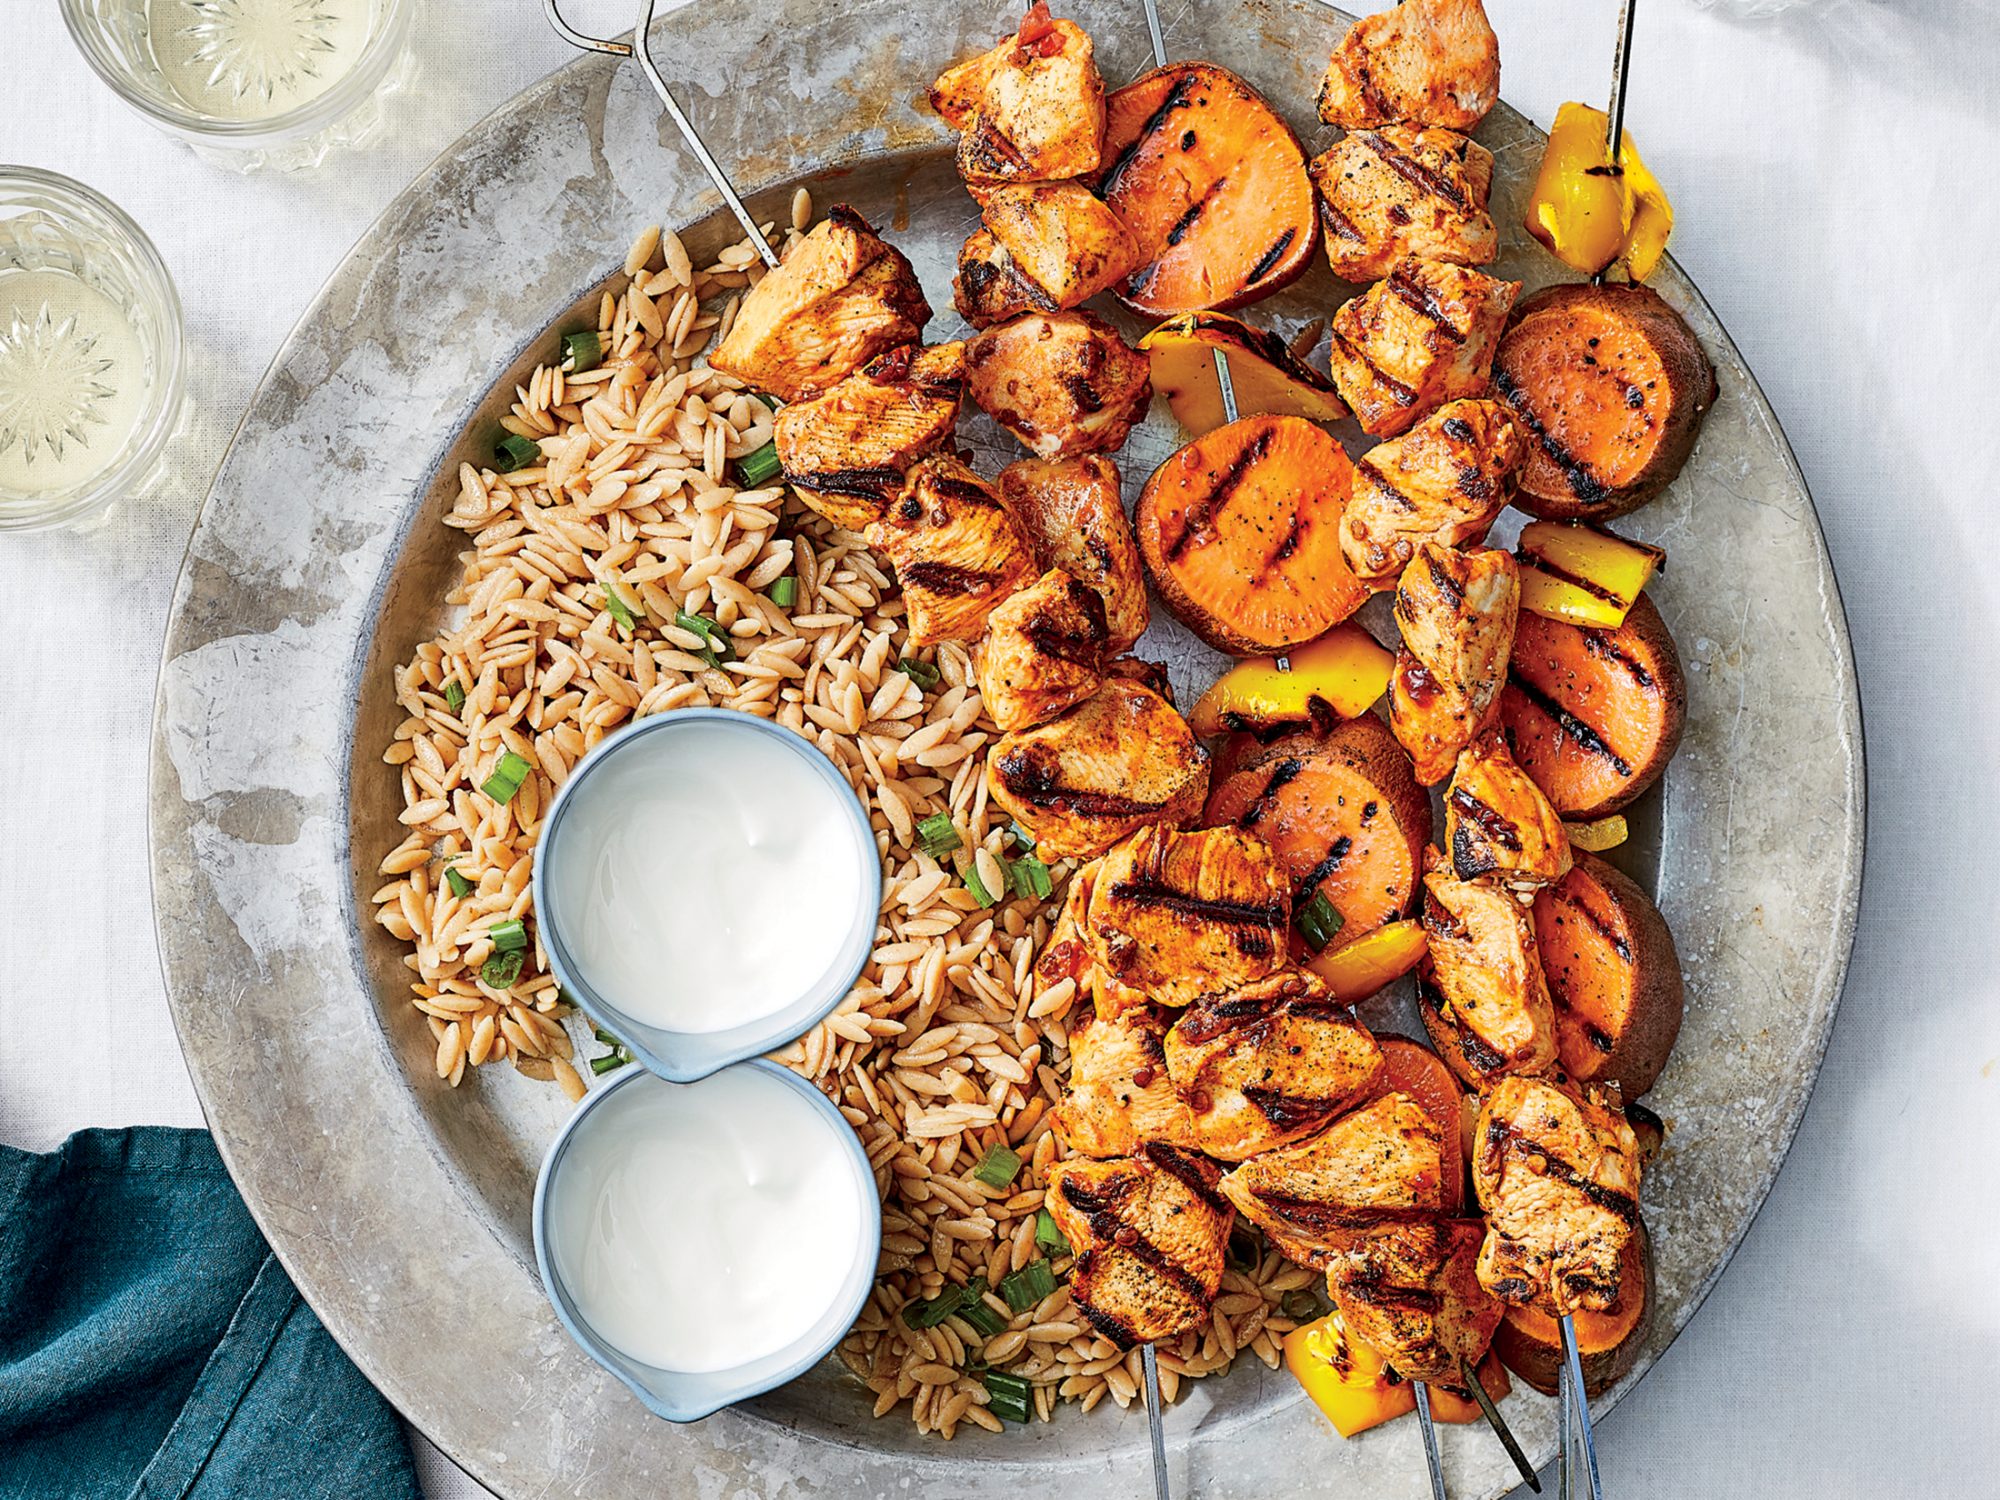 Chicken and Vegetable Kebabs With Orzo